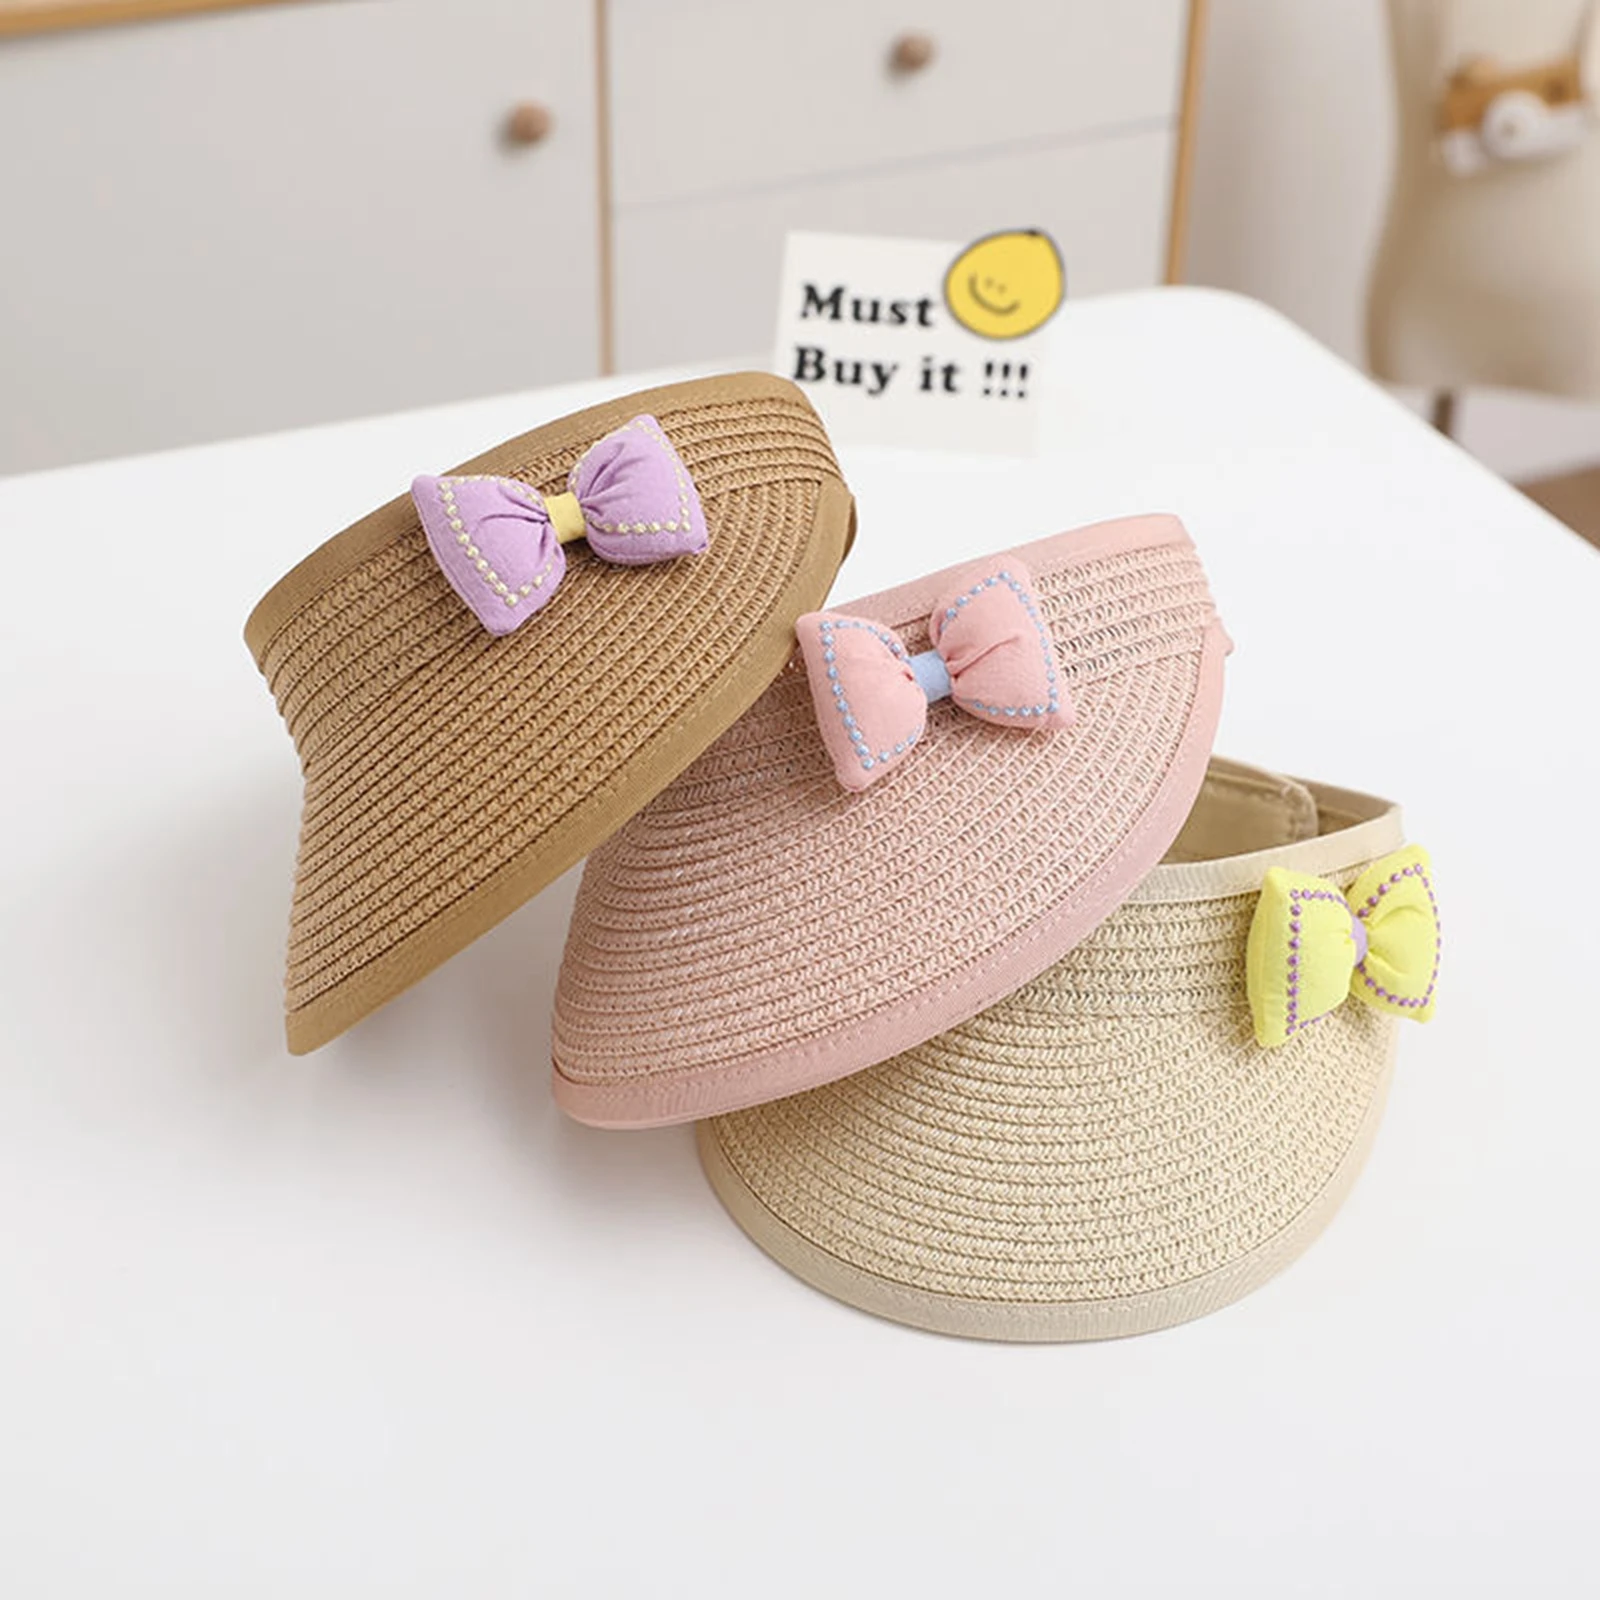 Mildsown Kid Girls Straw Hat Soft Cute Bowknot Wide Brim Empty Top Sun Hat with Bow-knot Foldable Summer Beach Cap